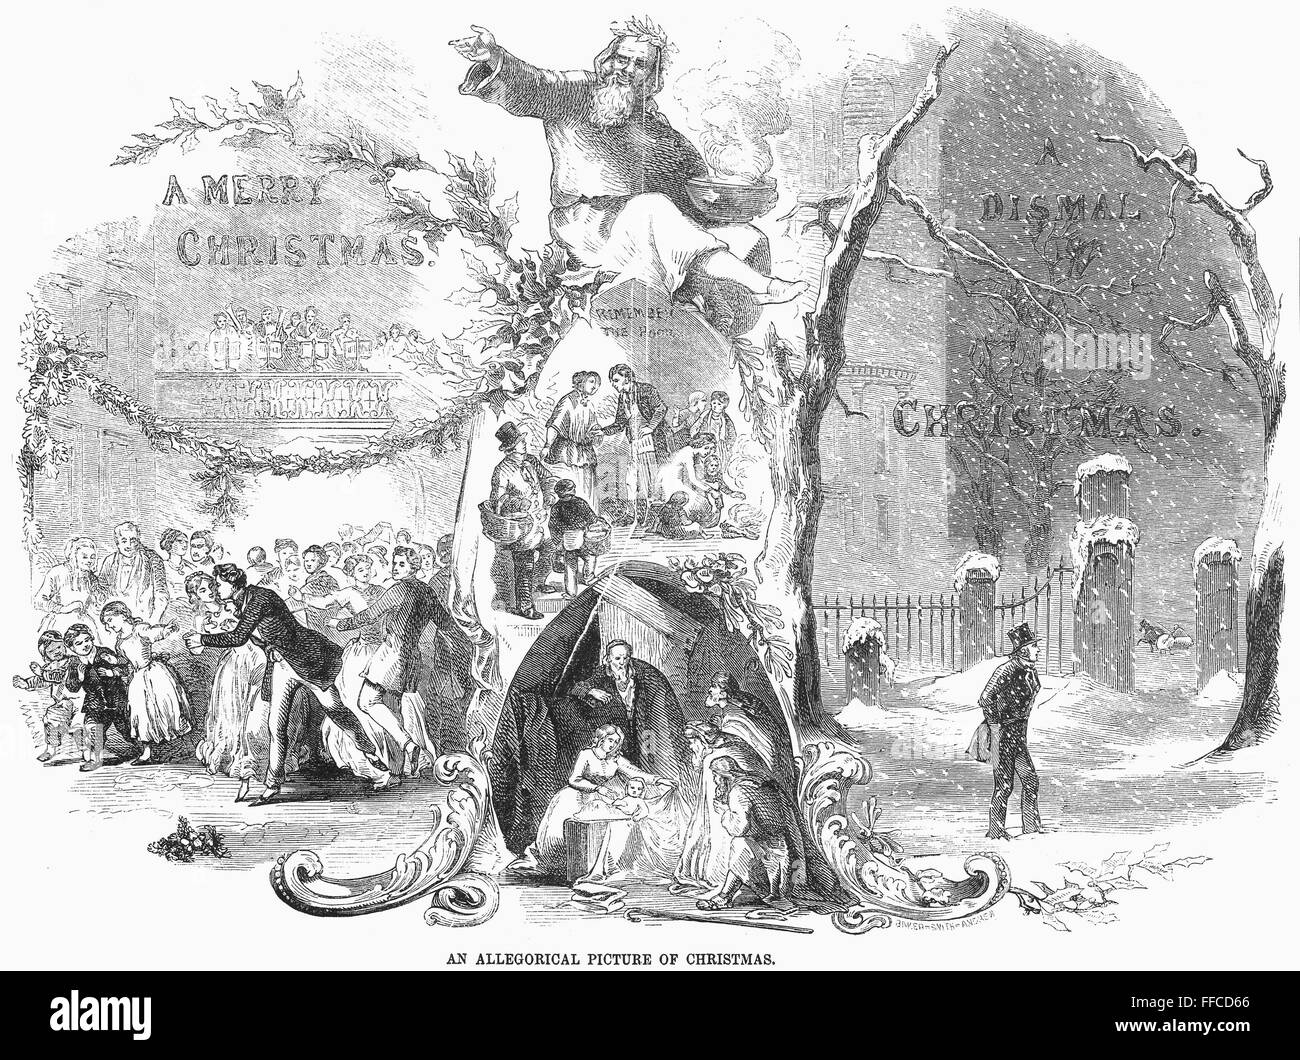 CHRISTMAS ALLEGORY, 1852. /n'An allegorical picture of Christmas.' Wood engraving, American, 1852. Stock Photo